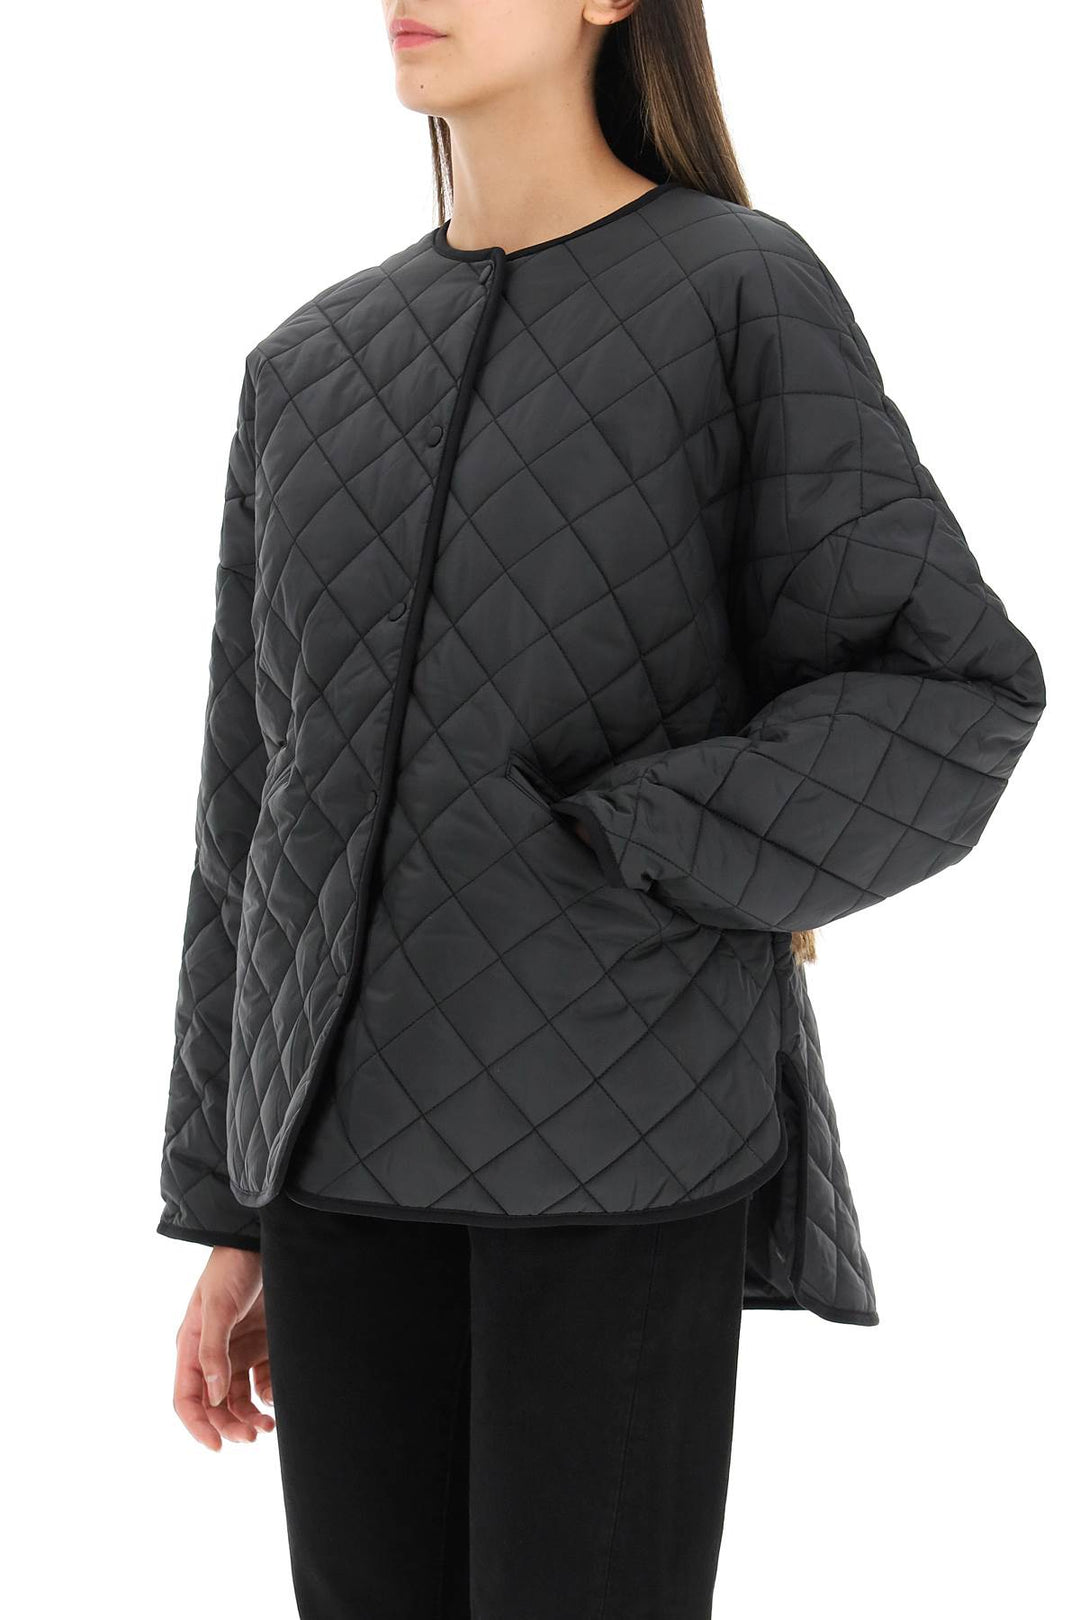 Toteme Quilted Boxy Jacket   Black